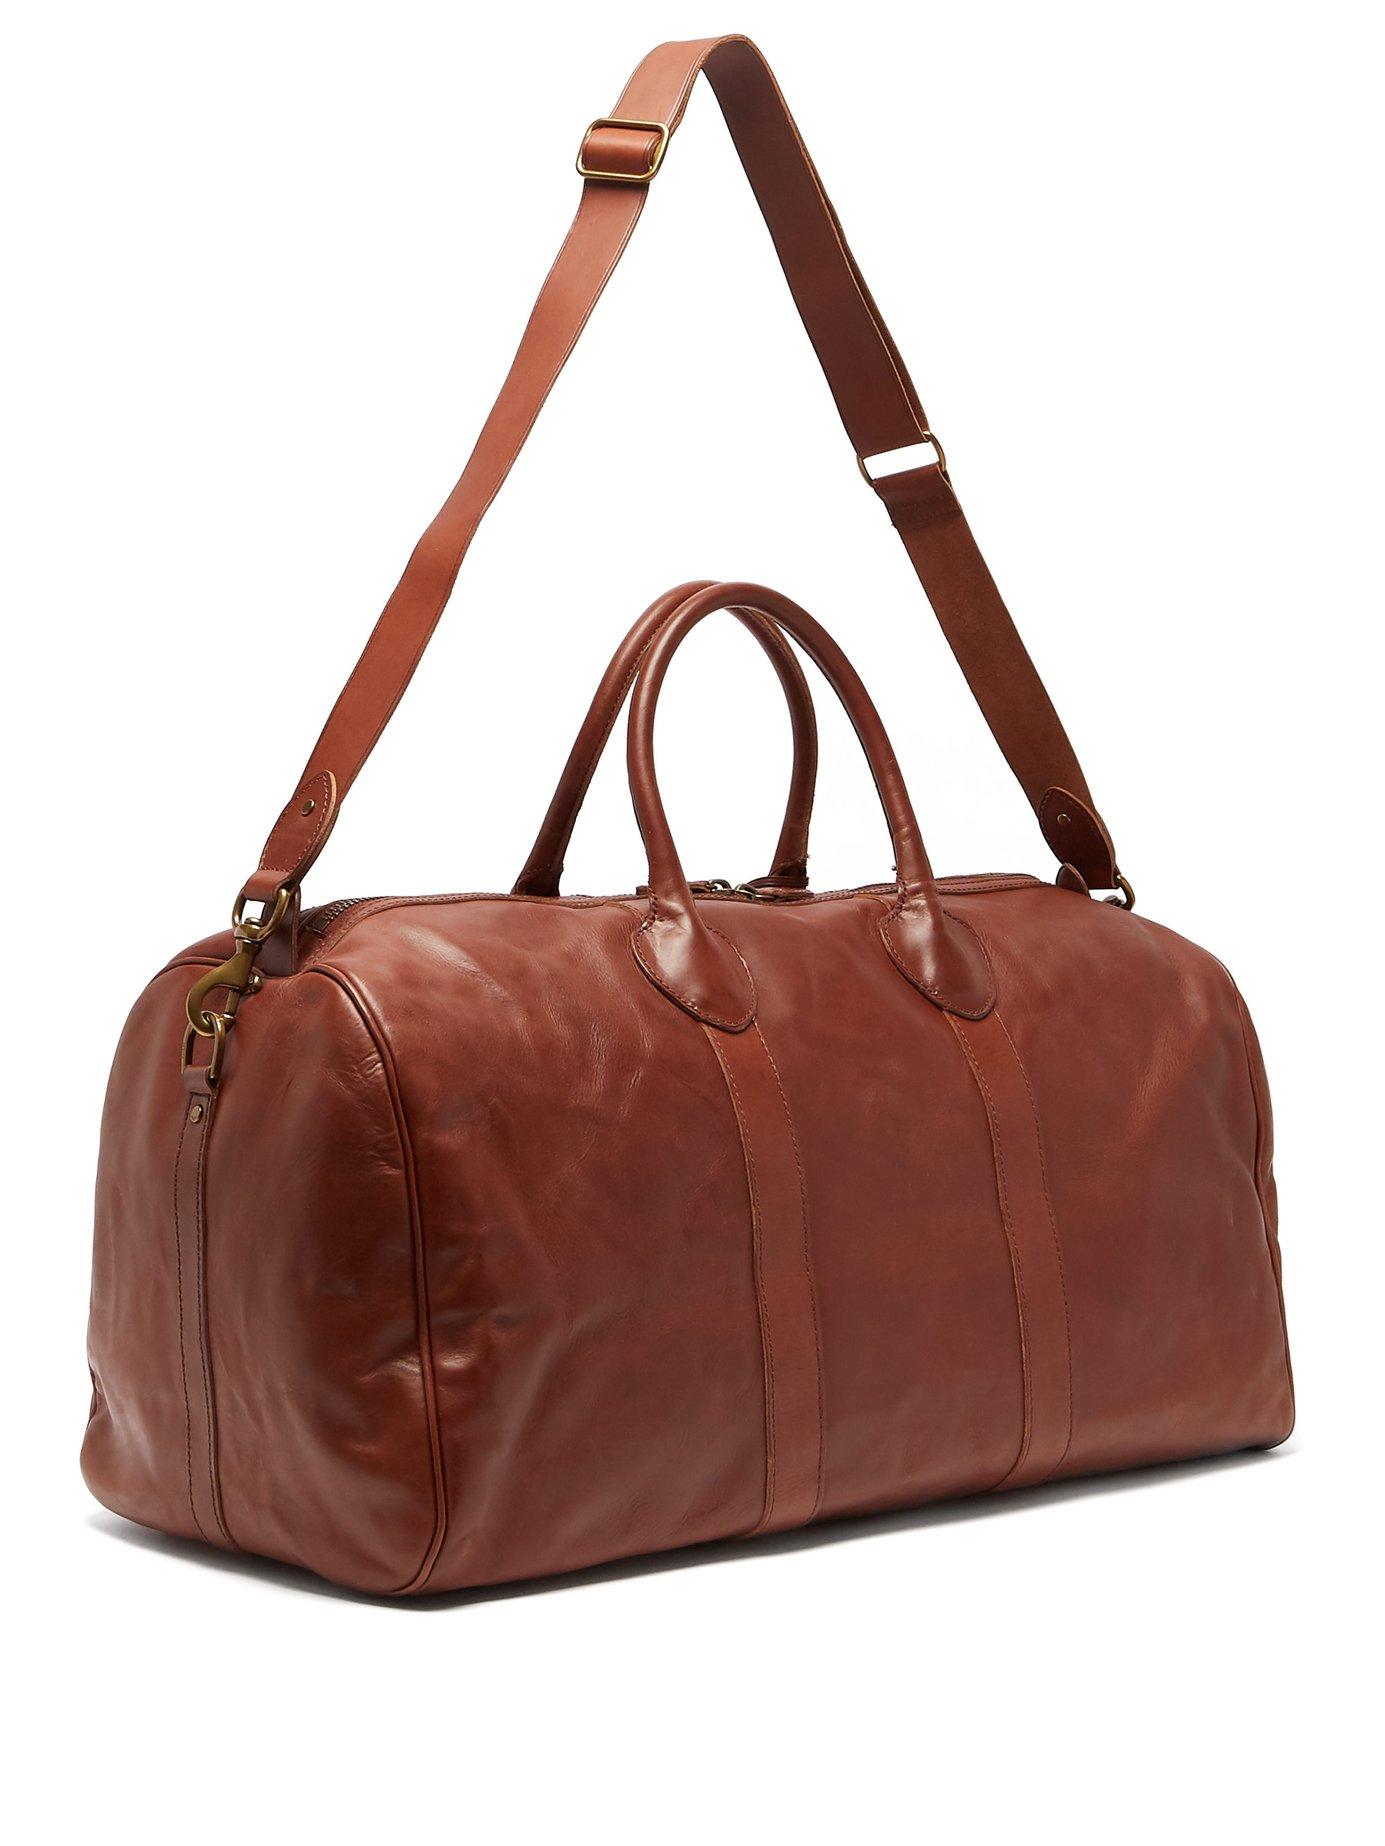 Polo Ralph Lauren Heritage Leather Weekend Bag in Brown for Men - Lyst